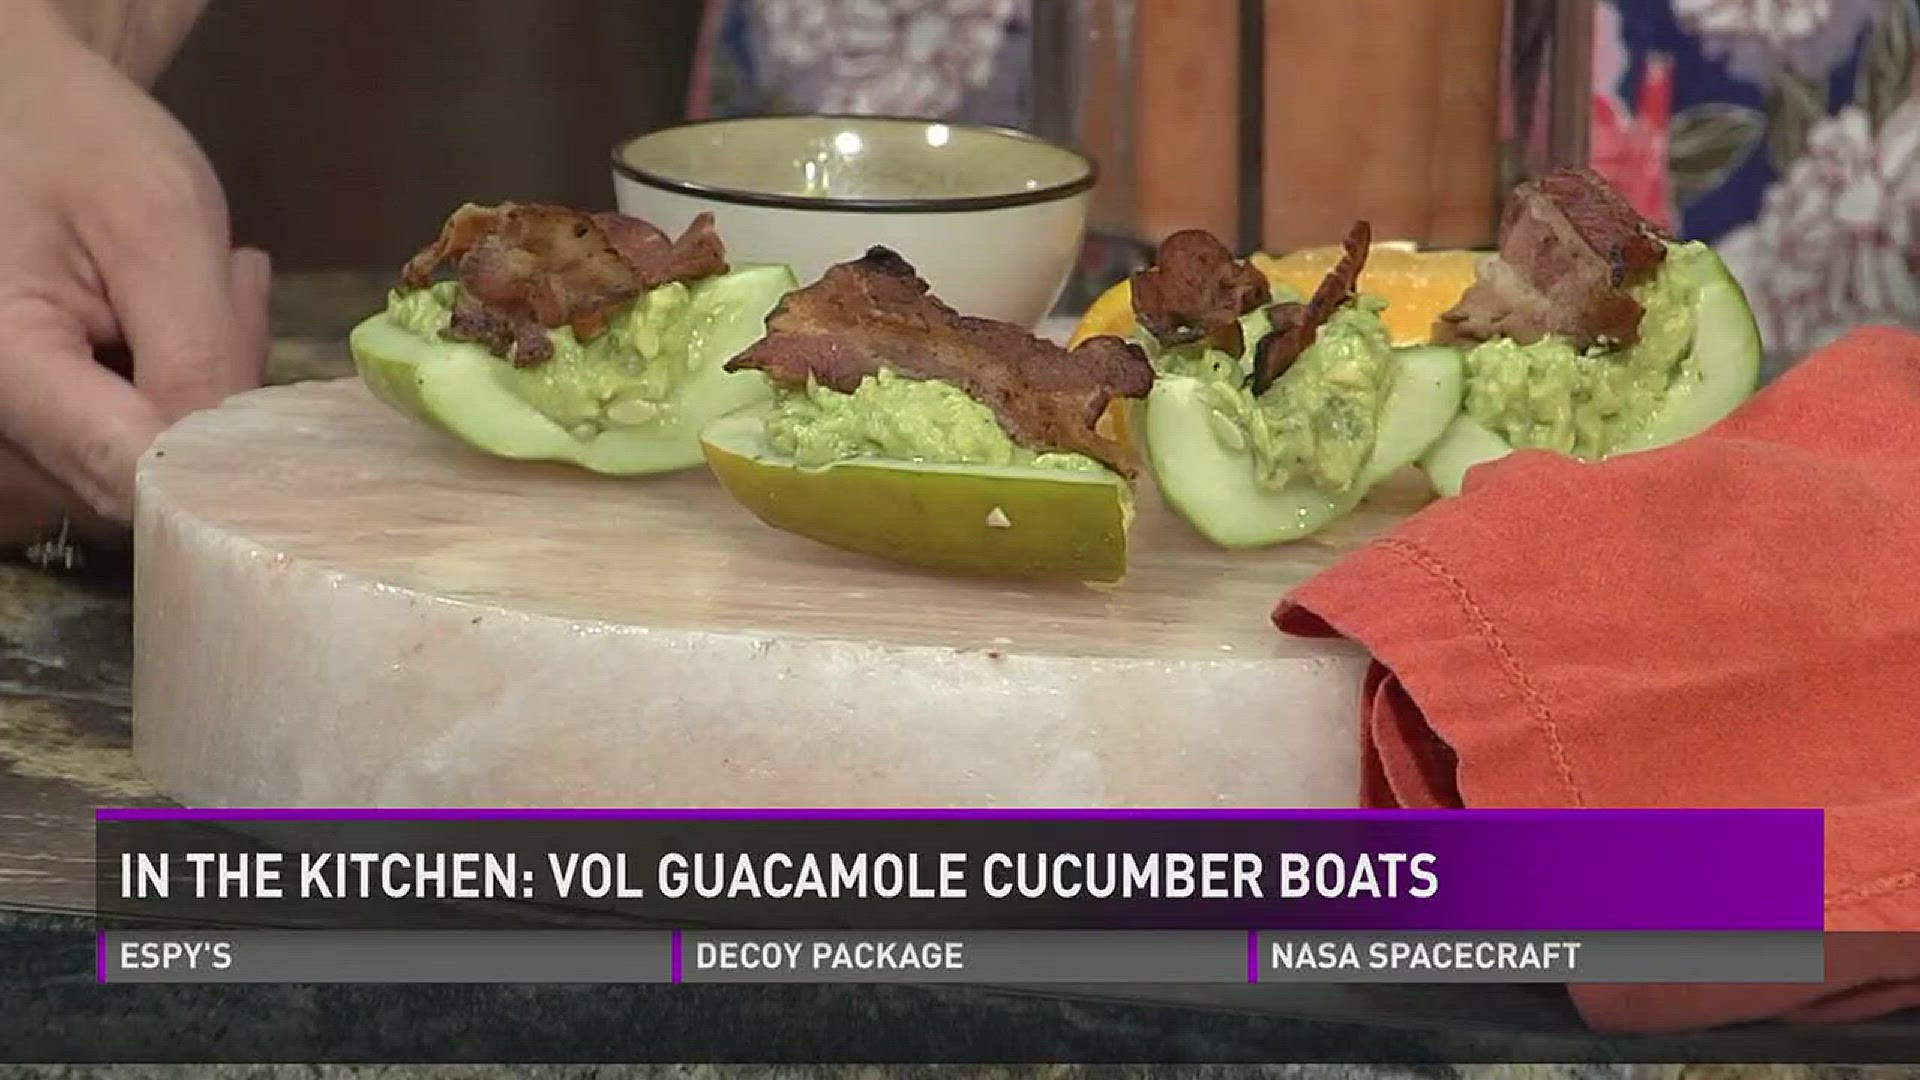 Scott and Michelle show us how to make a healthy and cute party snack.